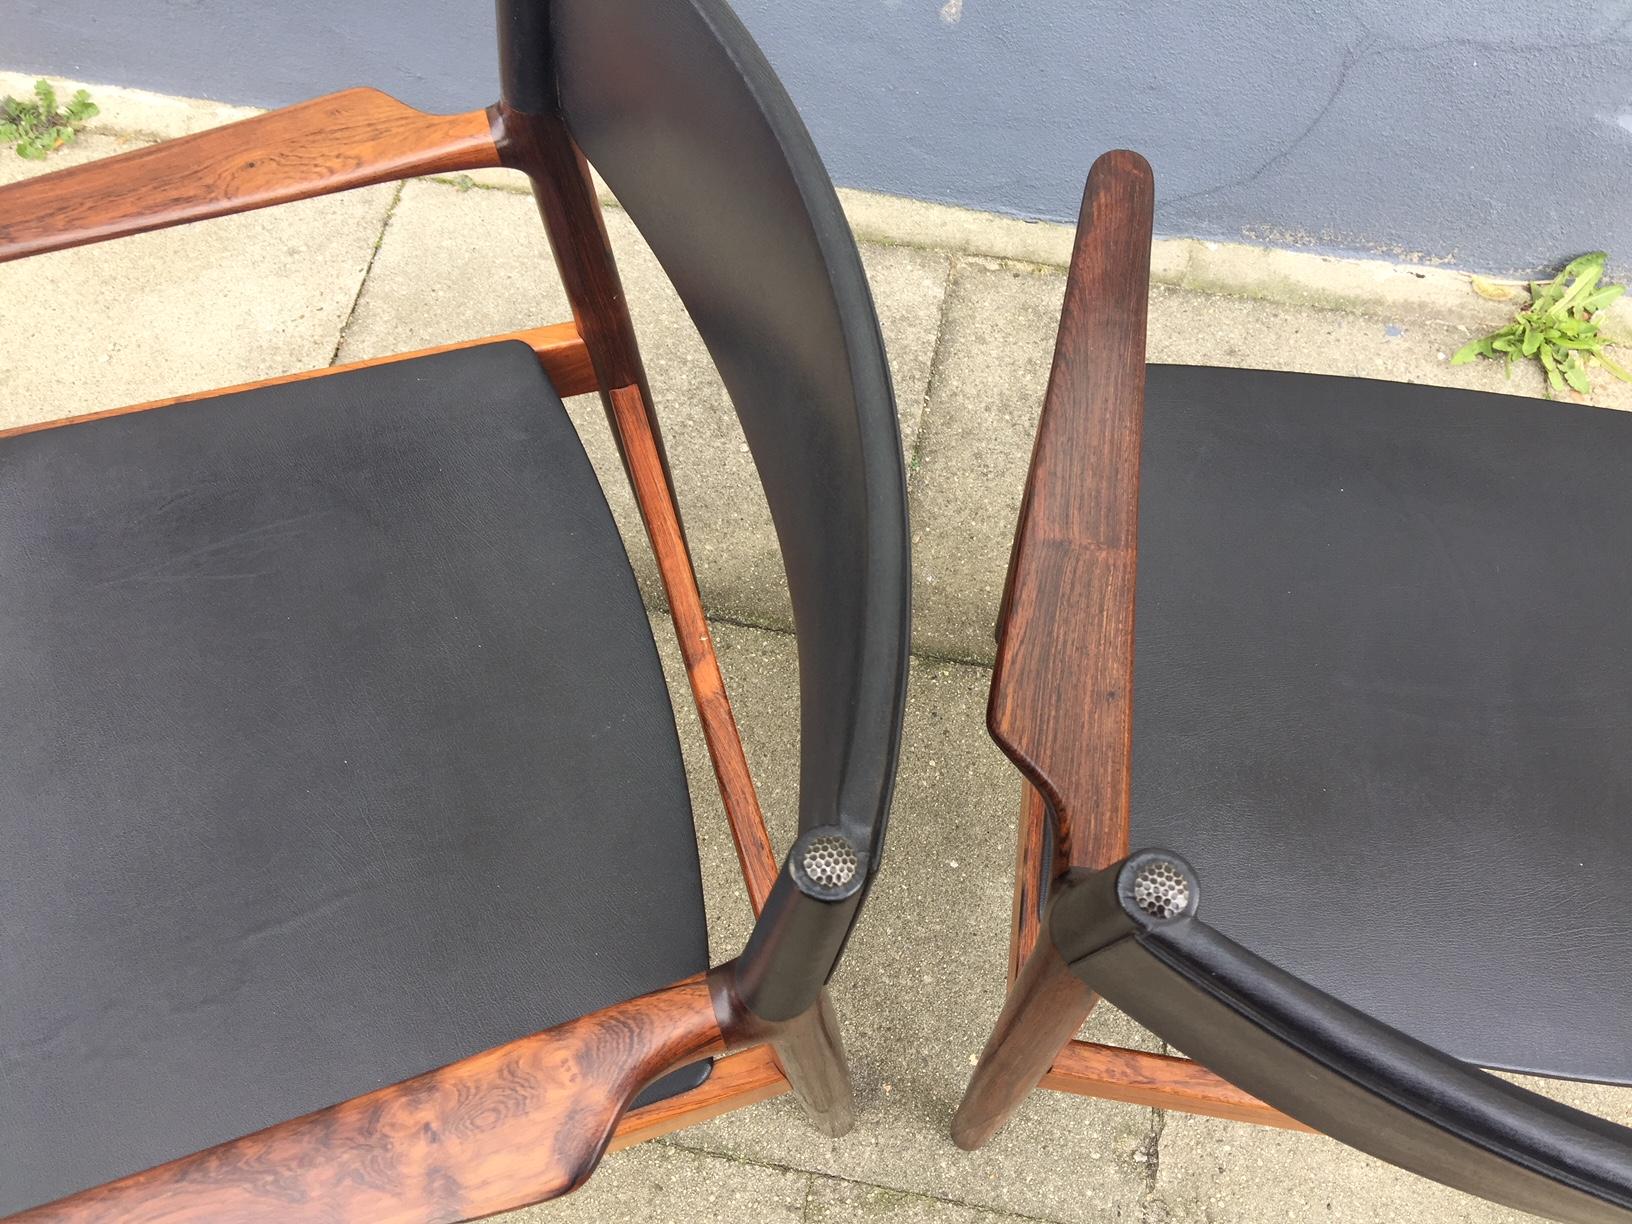 Pair of rare Danish Modern armchairs designed by Erik Wørts in 1960 and manufactured by Vamo in Denmark. This model is called 'Erika' and was Wørts favorite design. The pair feature solid Brazilian rosewood frames with black nappa upholstery